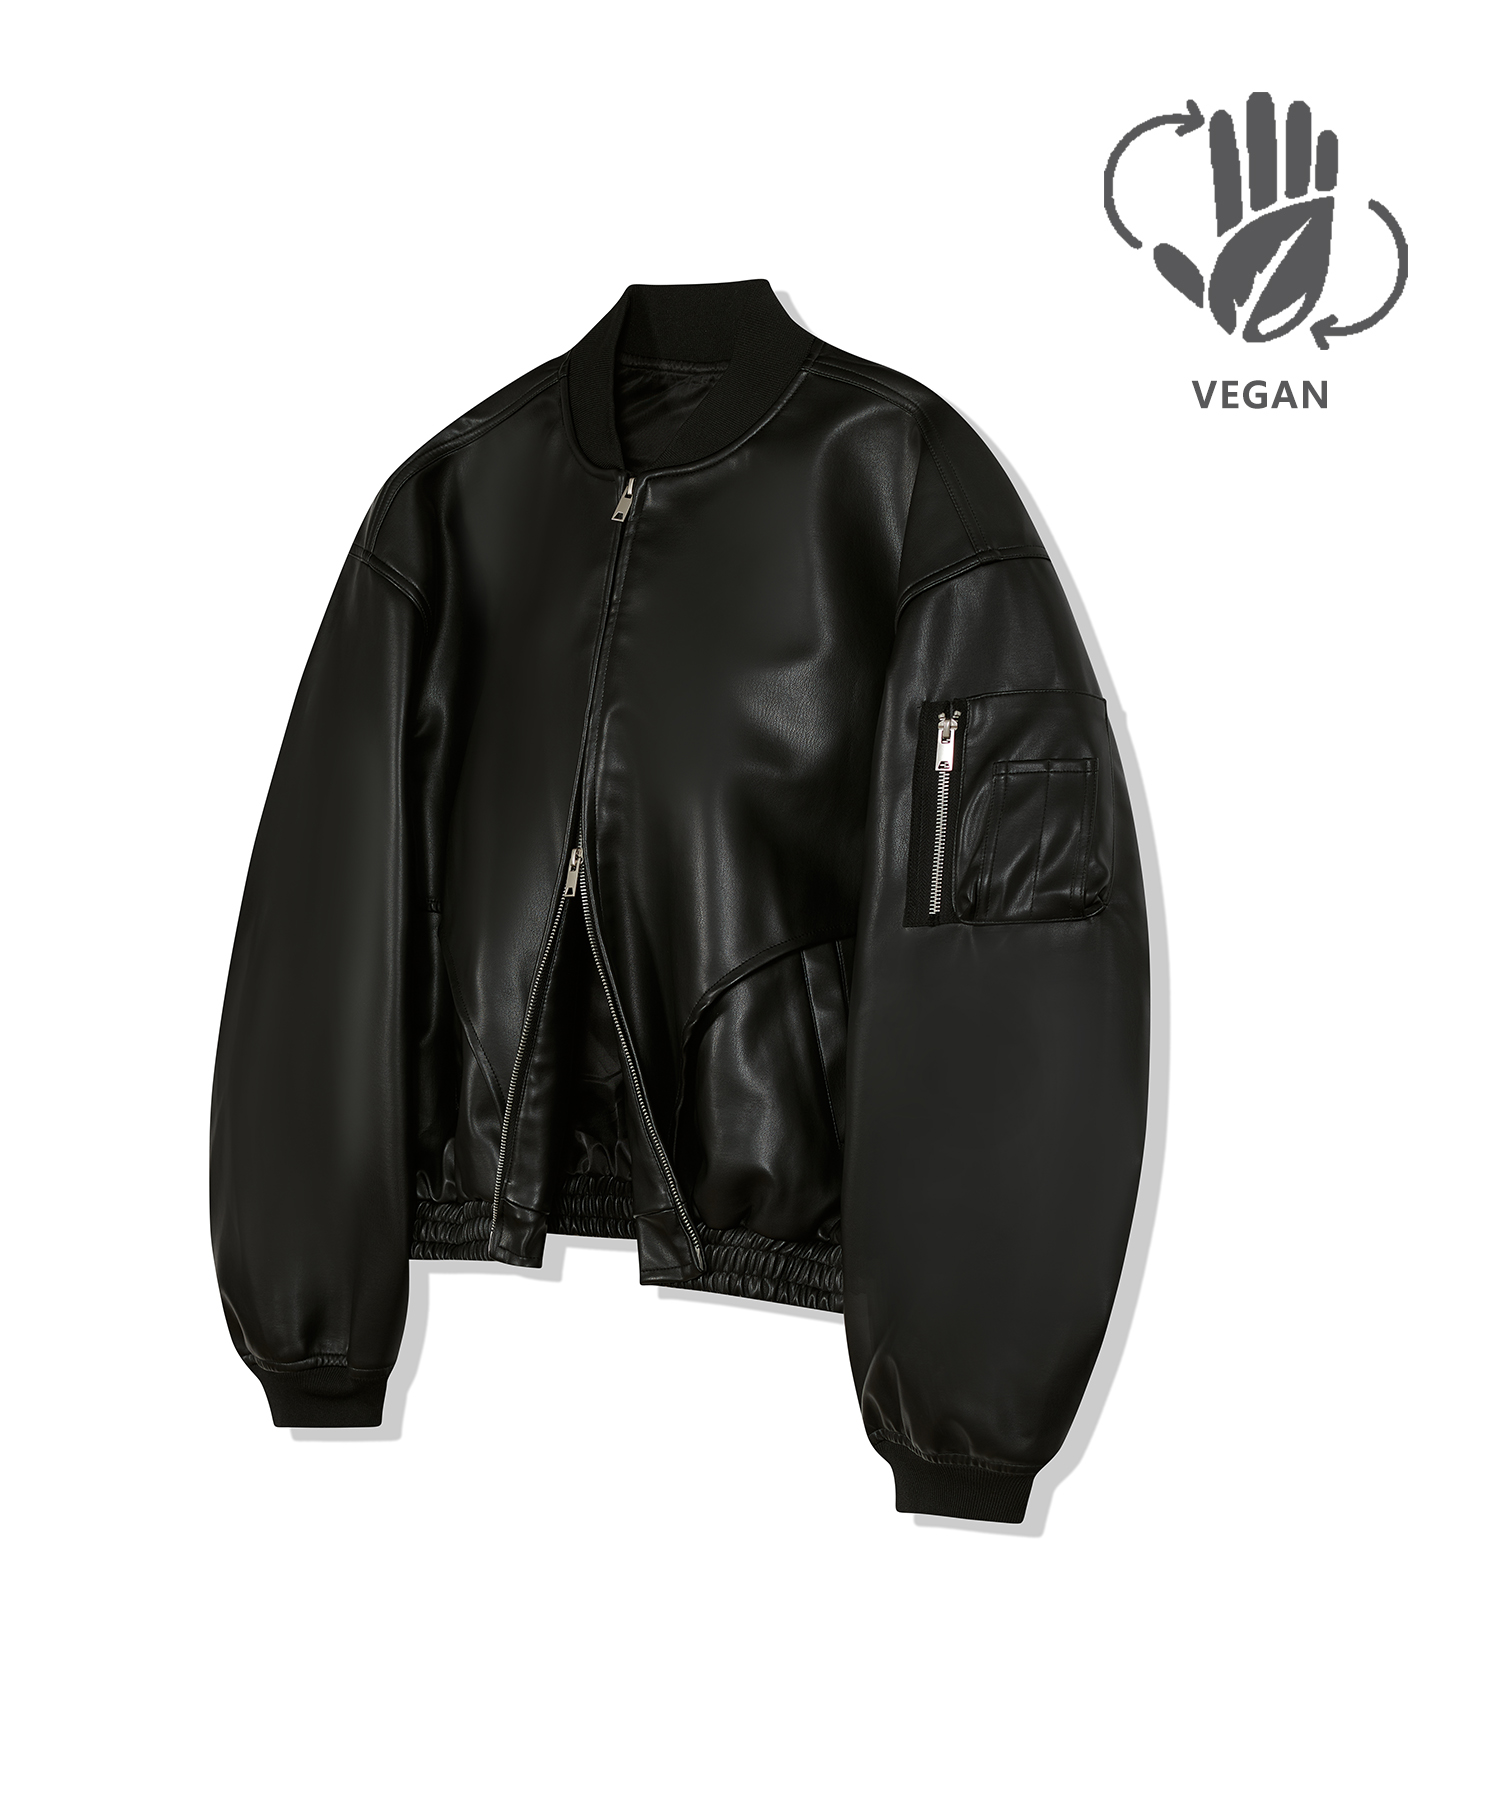 87-STAN026 [Vegan Leather] Curved Layer Bomber Leather Jacket Black